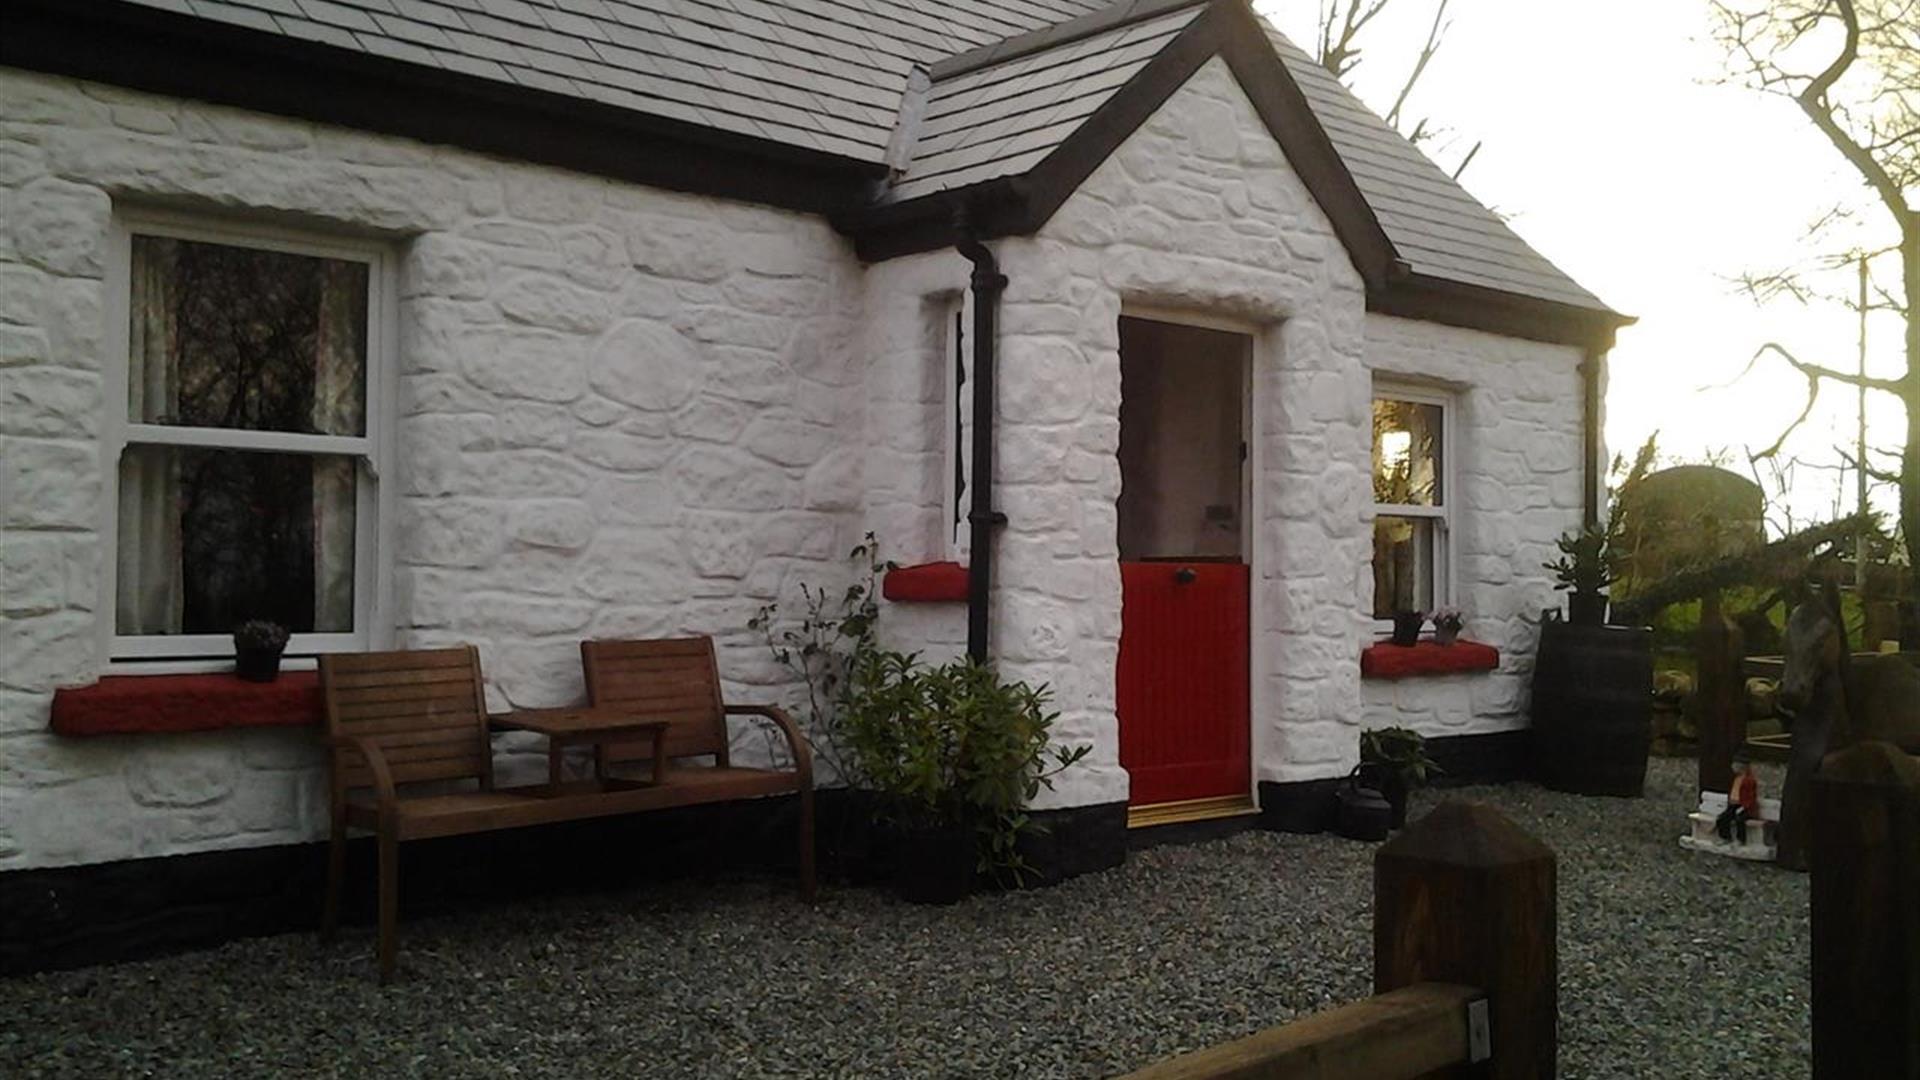 Outside view of cottage with red door and wooden chairs at front